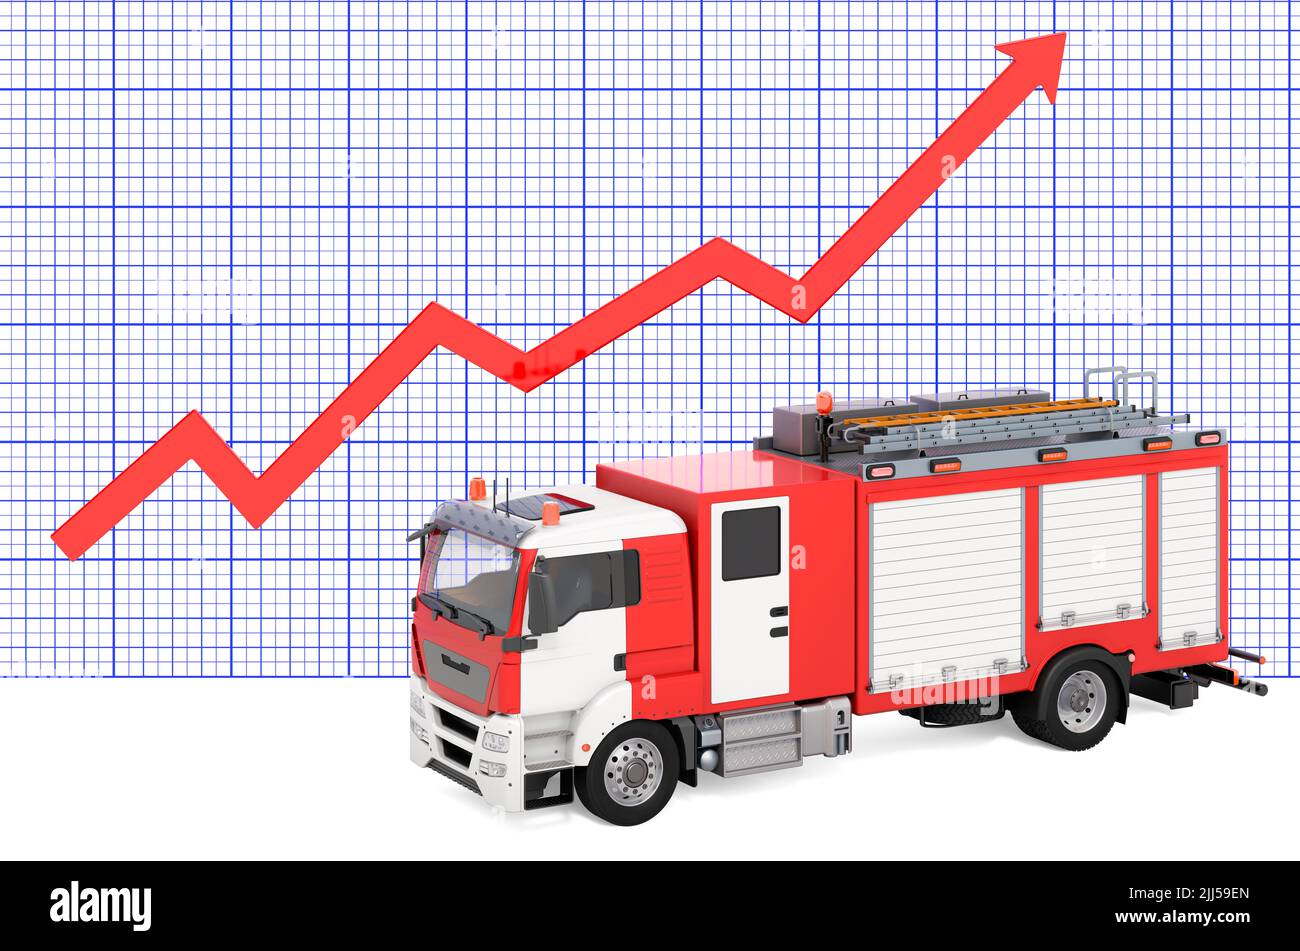 Fire truck with growing chart. 3D rendering isolated on white background Stock Photo